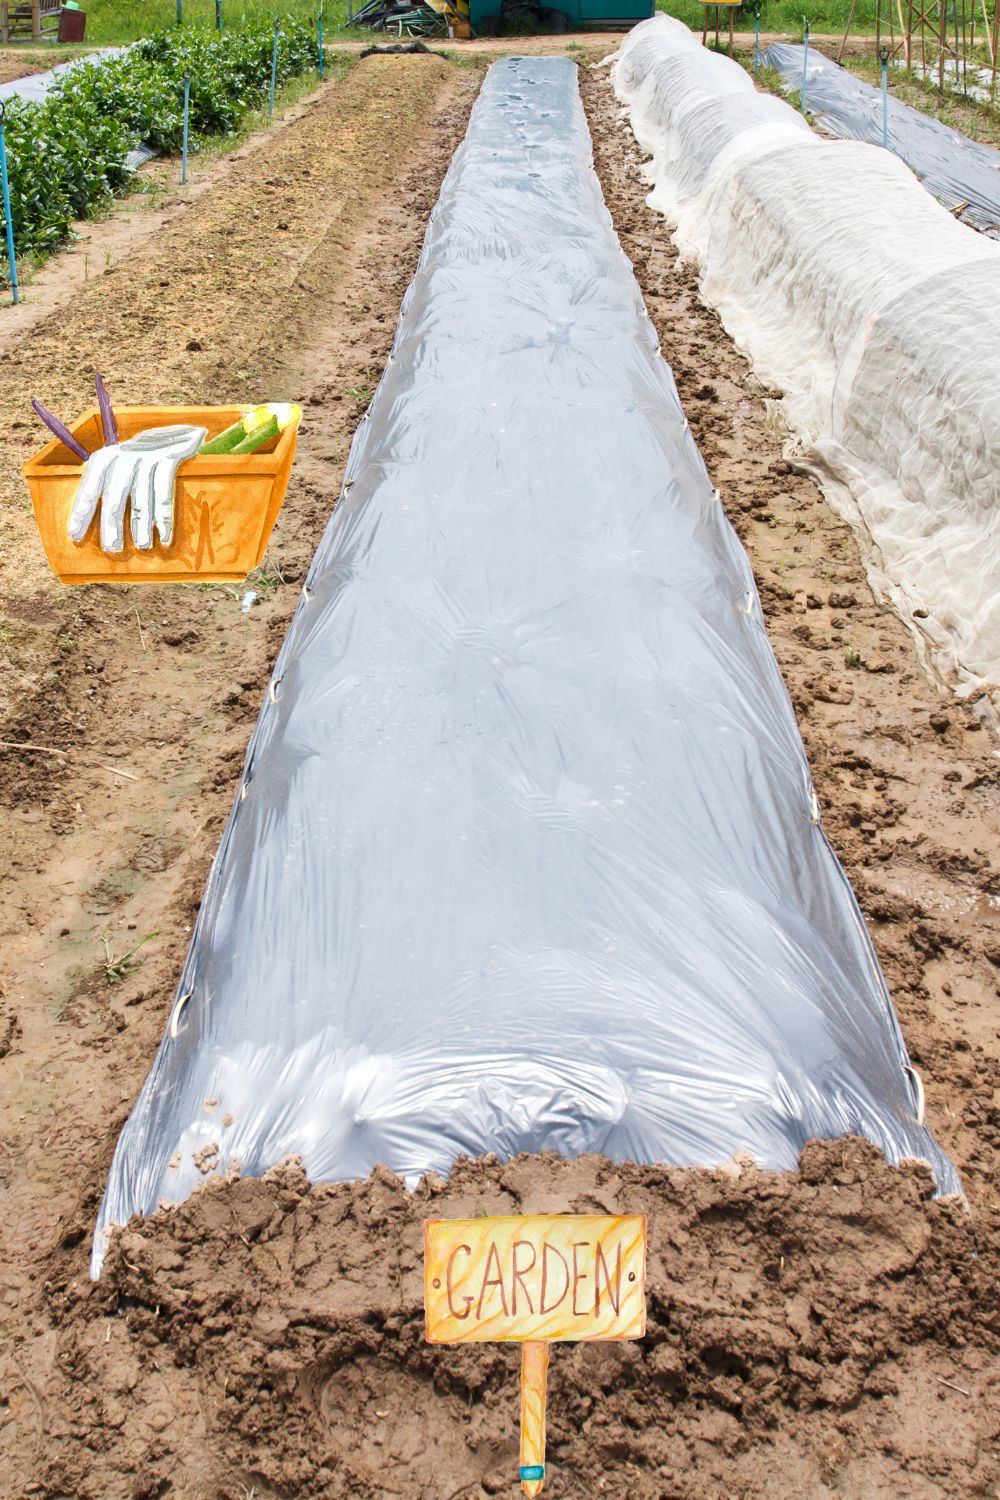 non-toxic weed control using 0 Chemicals gardening weed barrier